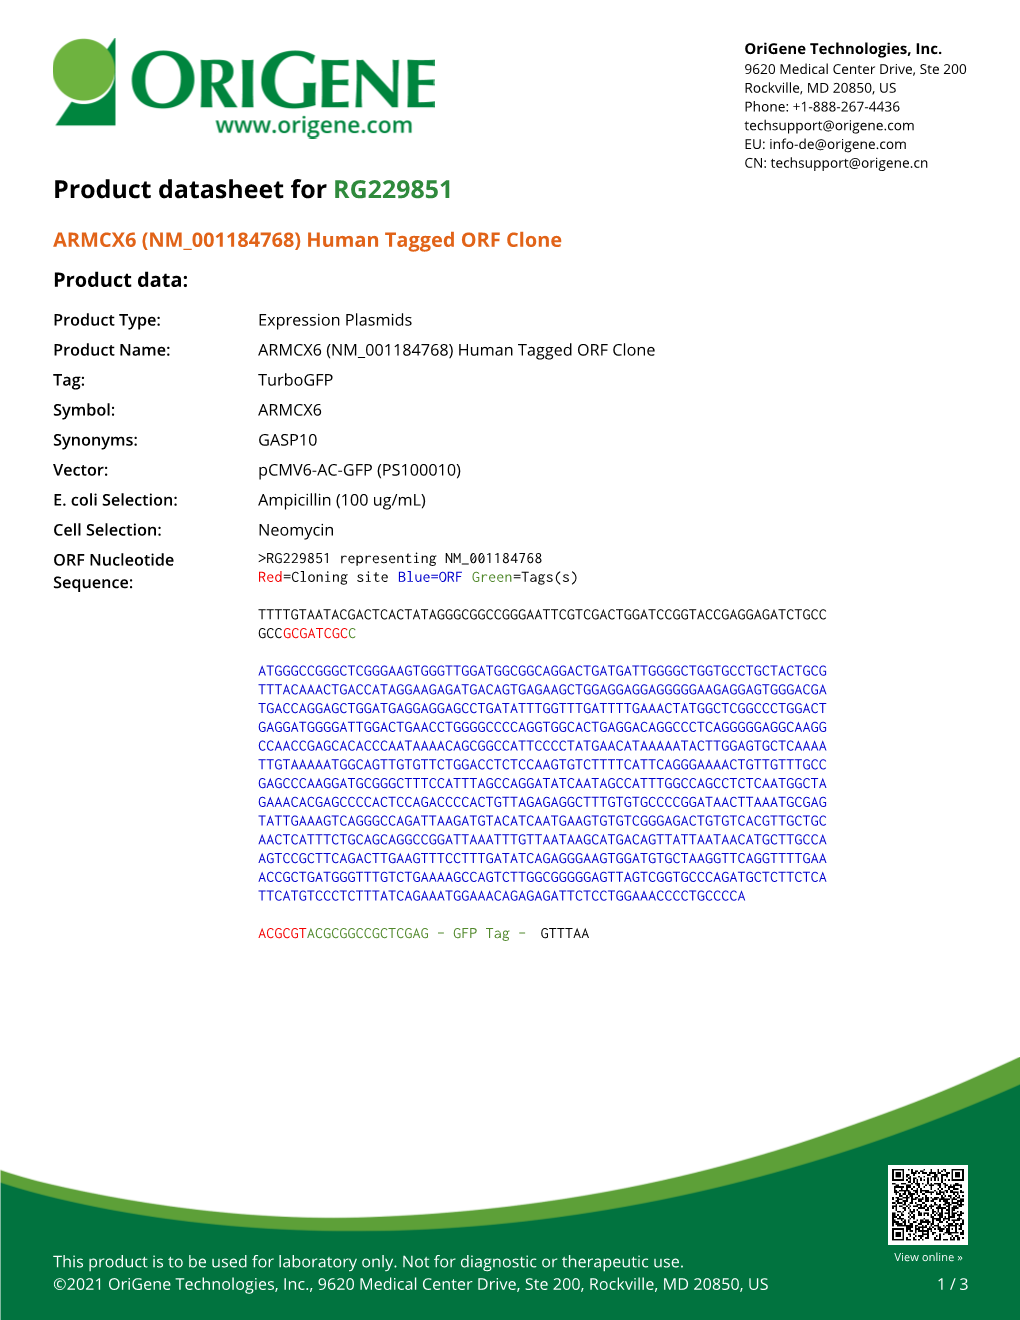 ARMCX6 (NM 001184768) Human Tagged ORF Clone Product Data